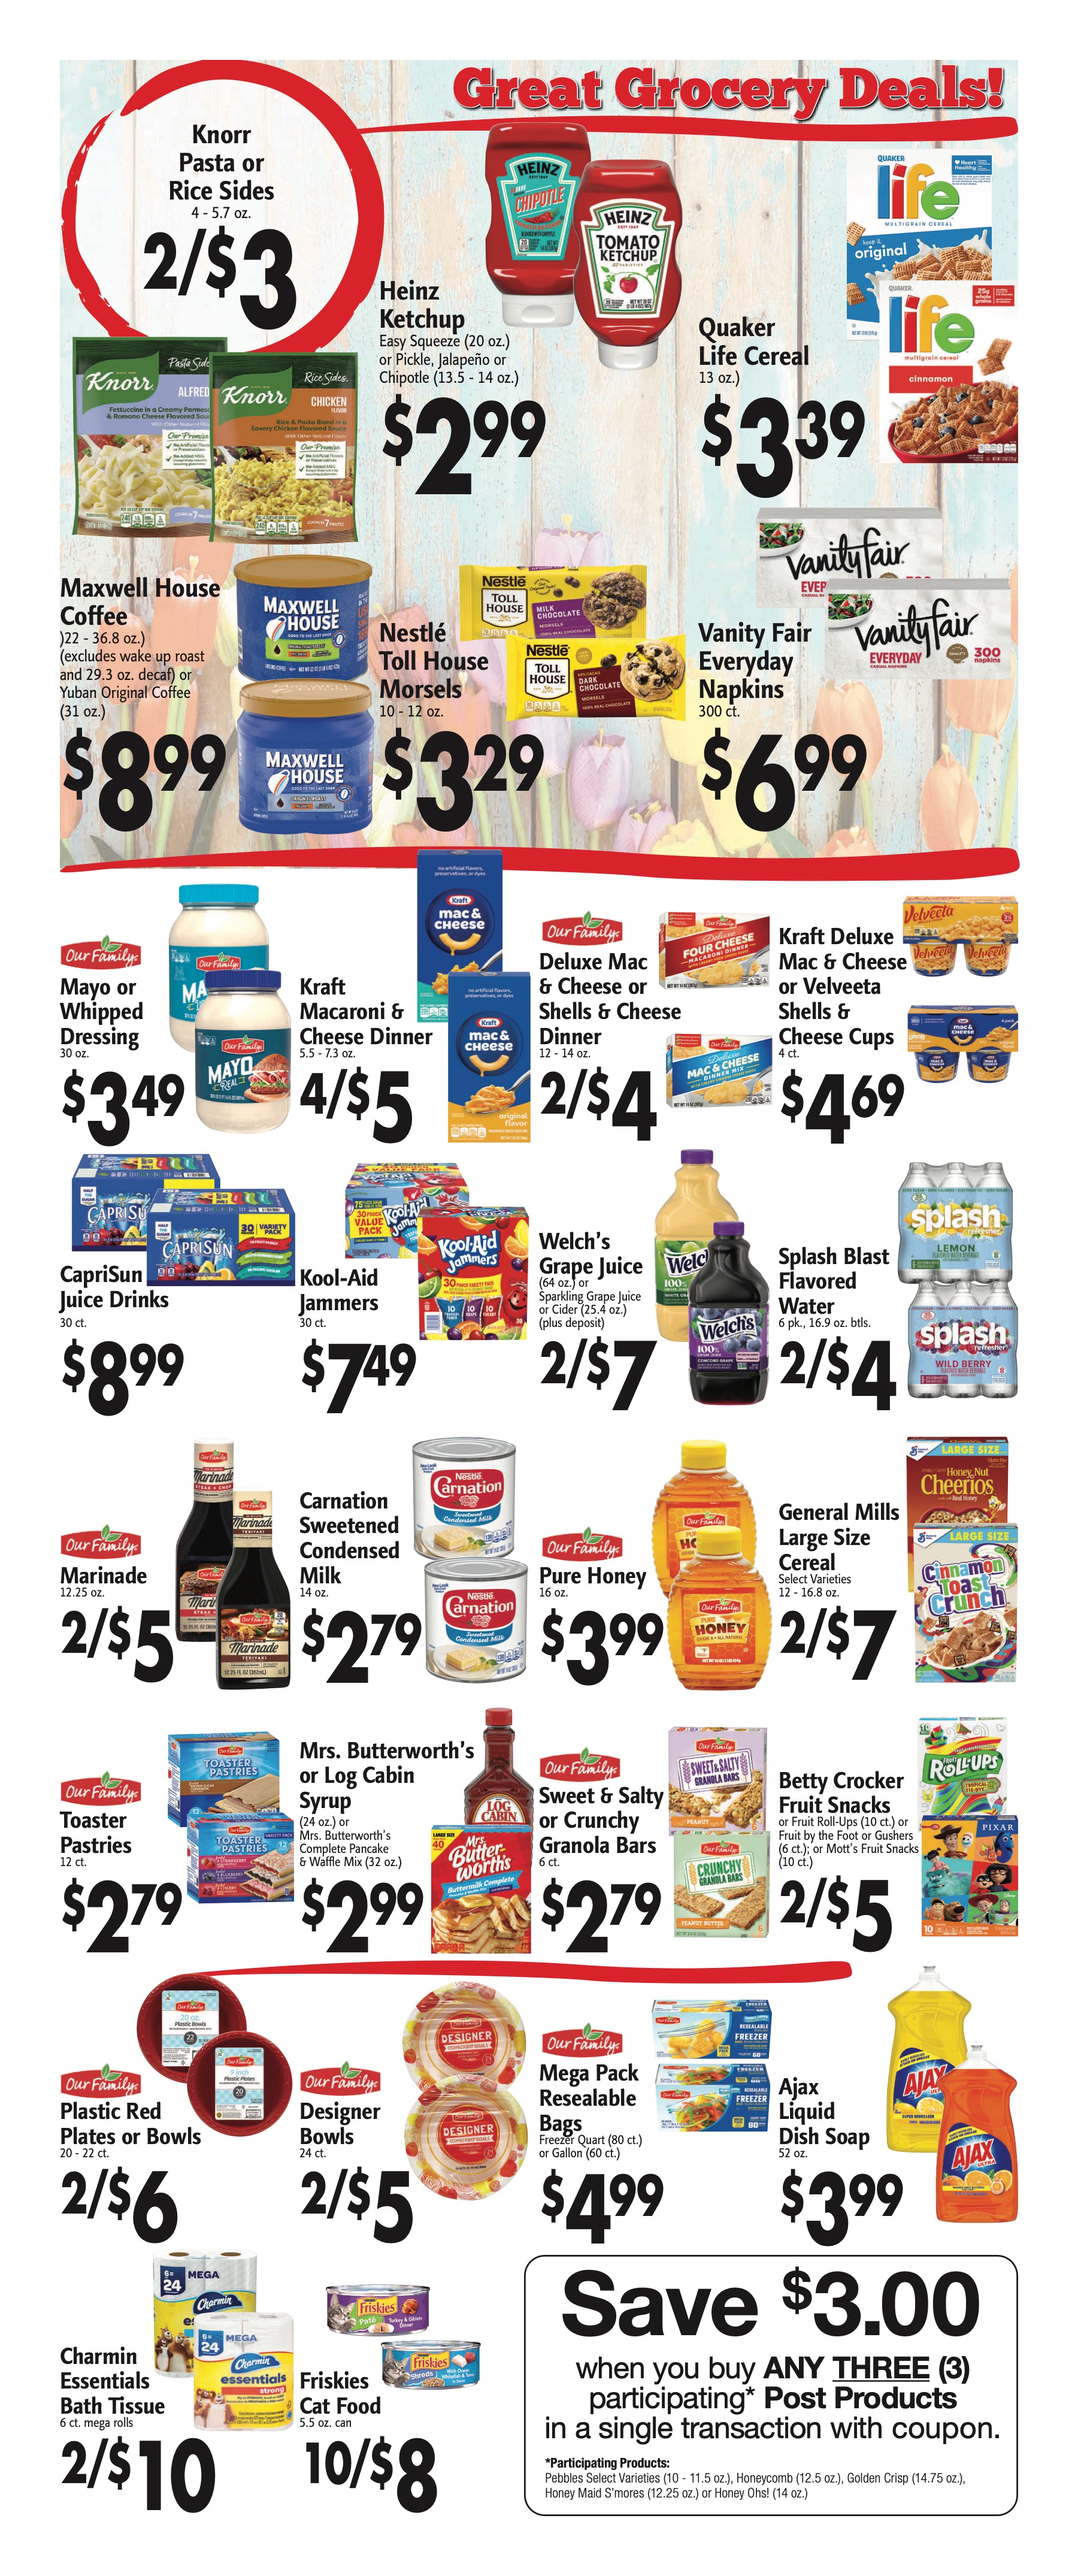 Weekly ad circular for Frank's Supermarkets